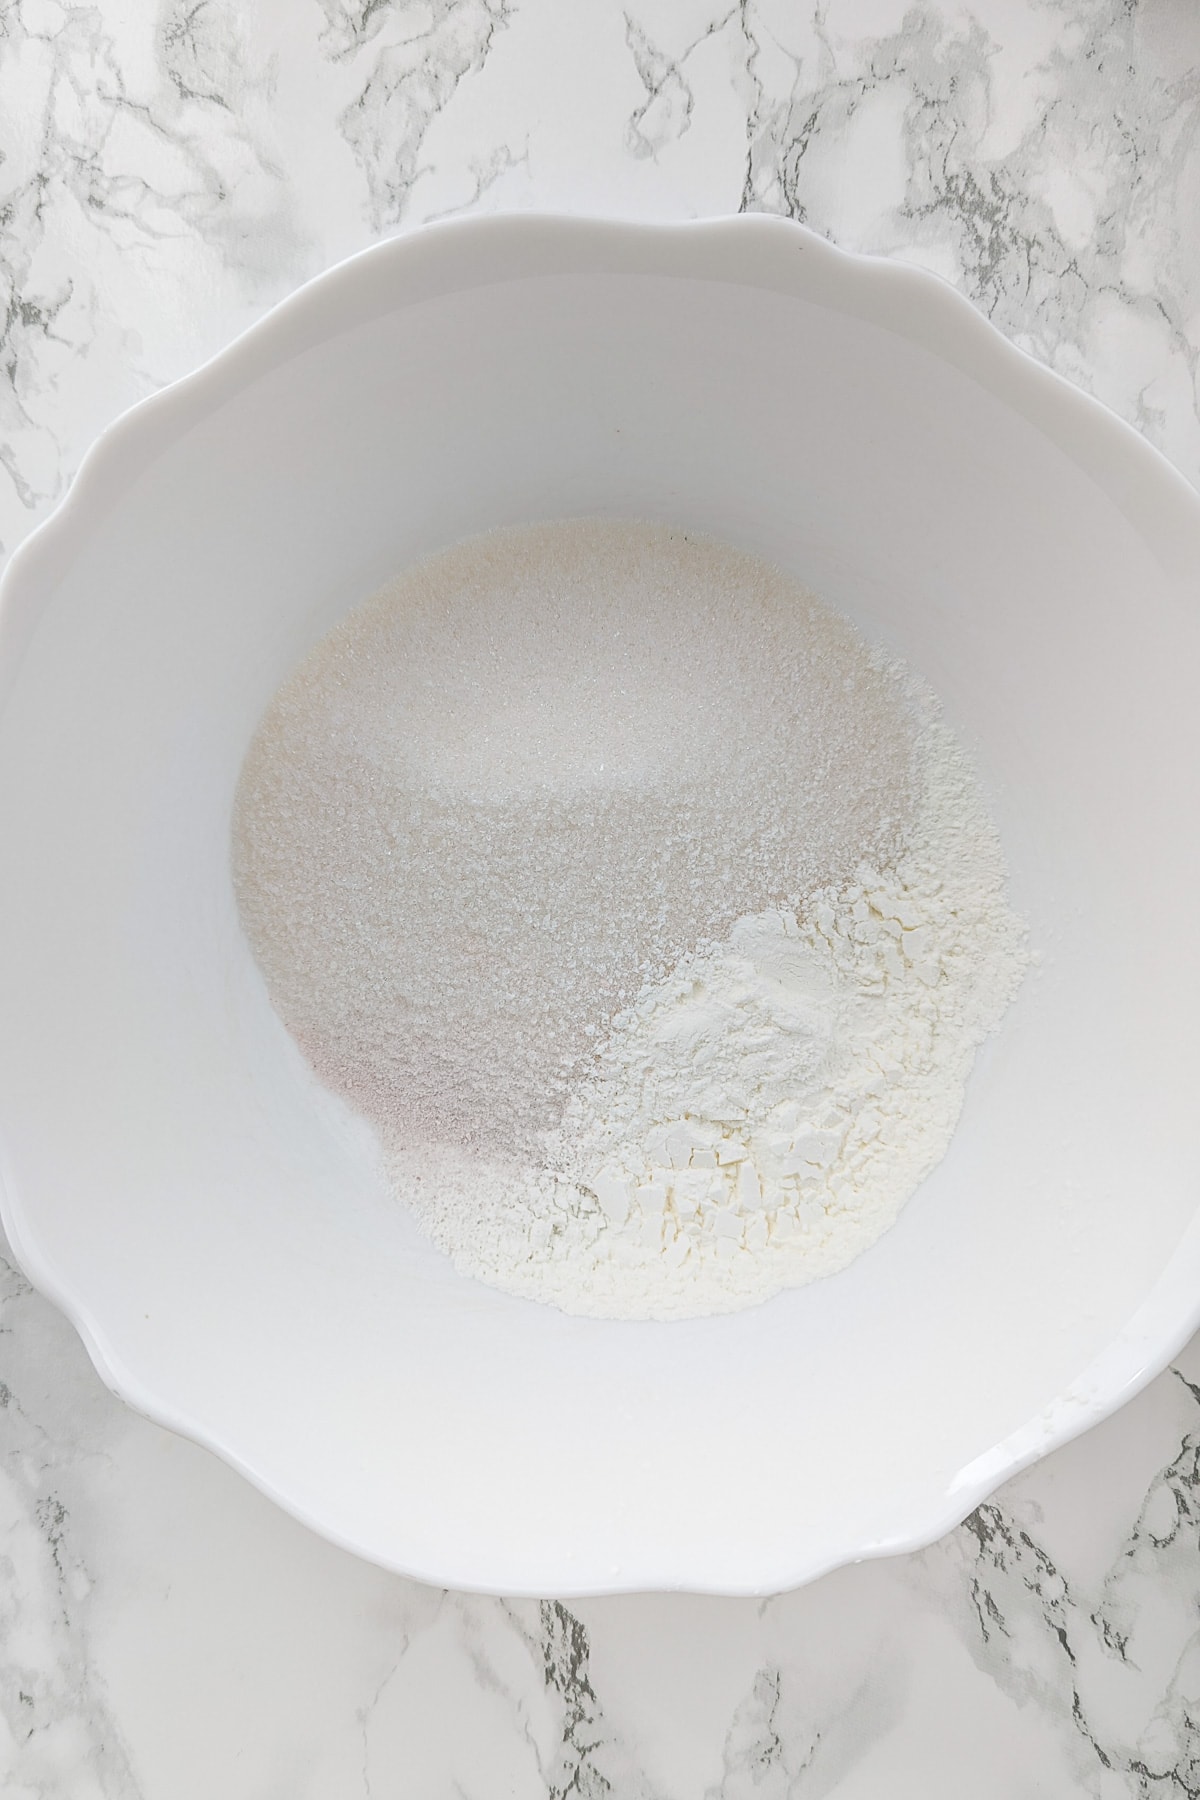 Top view of a white plate with starch and sugar.